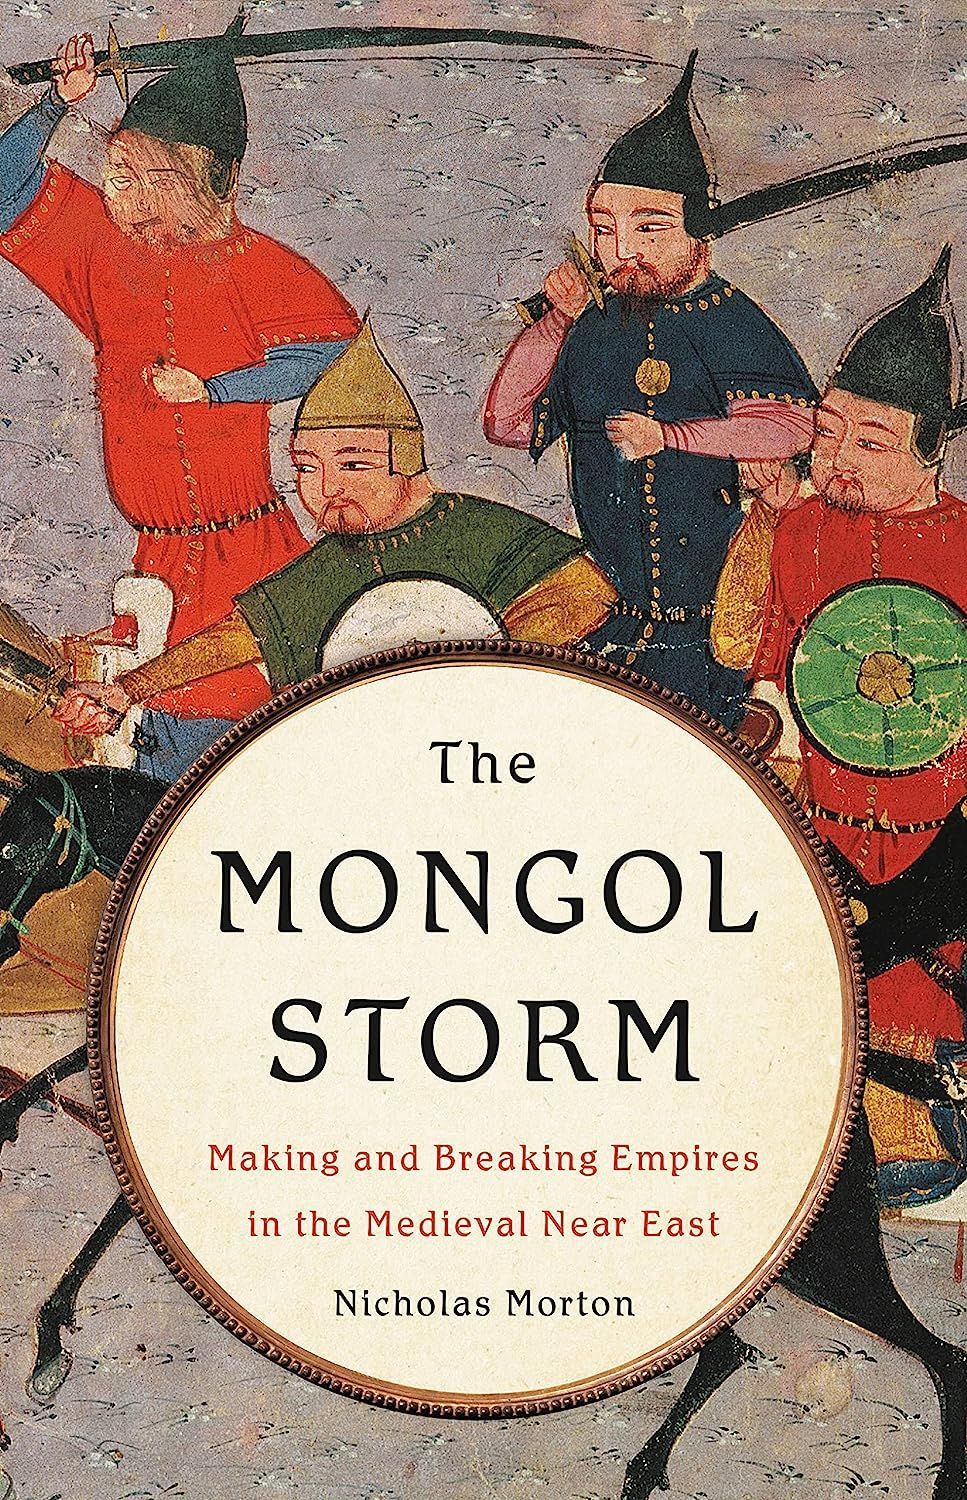 A Medieval Age of Disruption: On Nicholas Morton’s “The Mongol Storm”